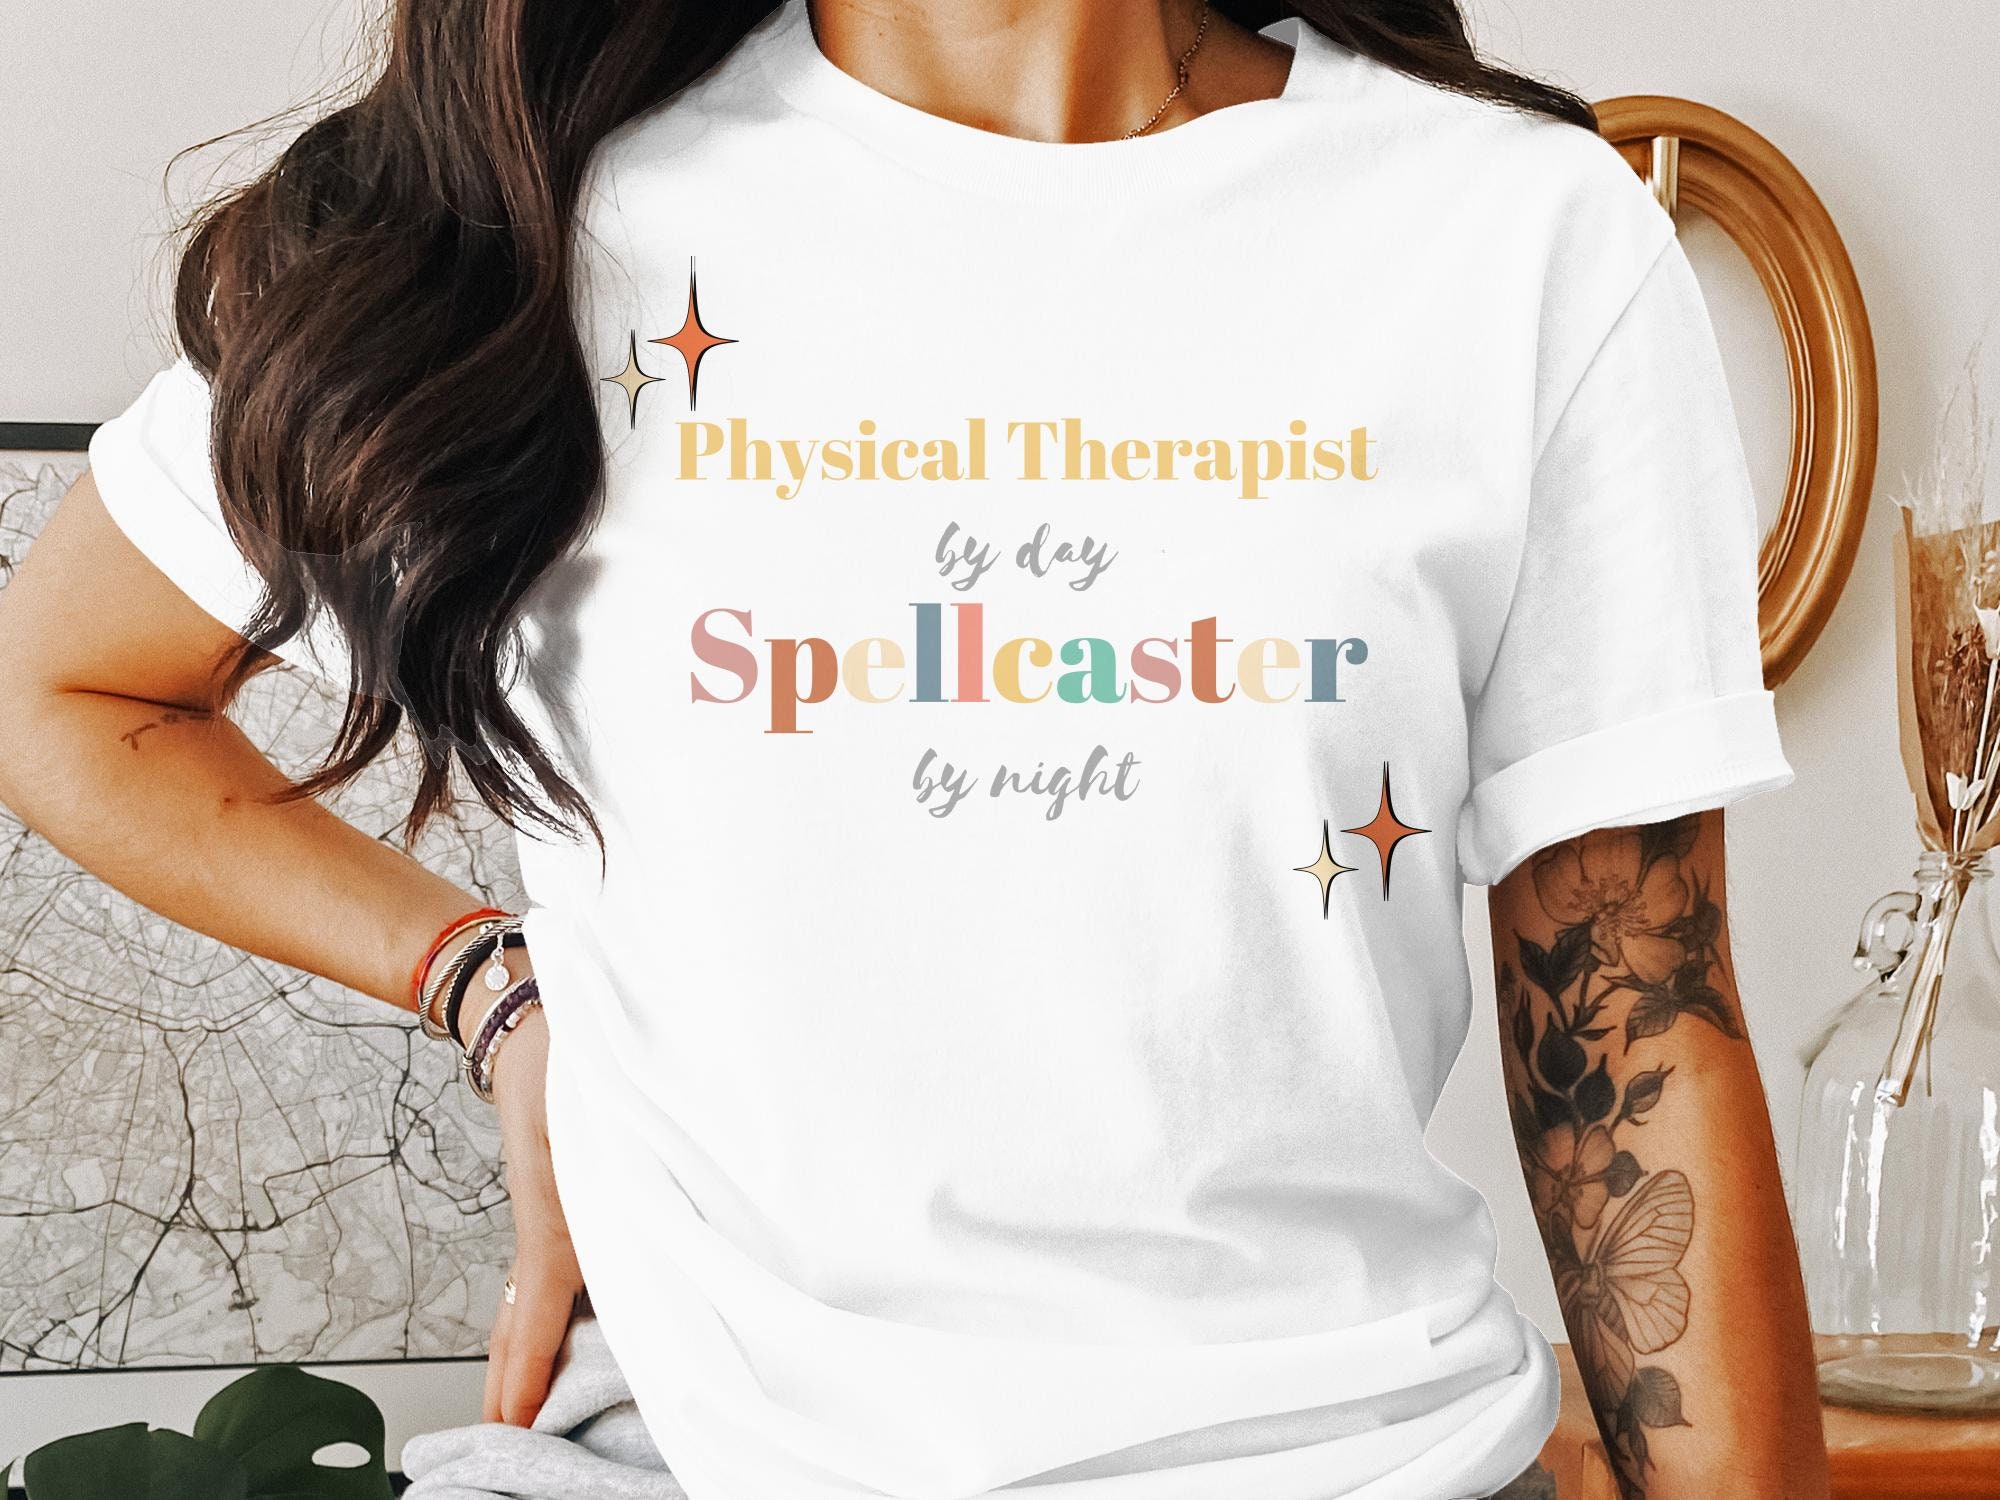 Discover Retro Halloween Physical Therapist Shirt, Team Shirts, Physical Therapist by day Spellcaster by Night, Halloween Tshirt, Gift, Customized